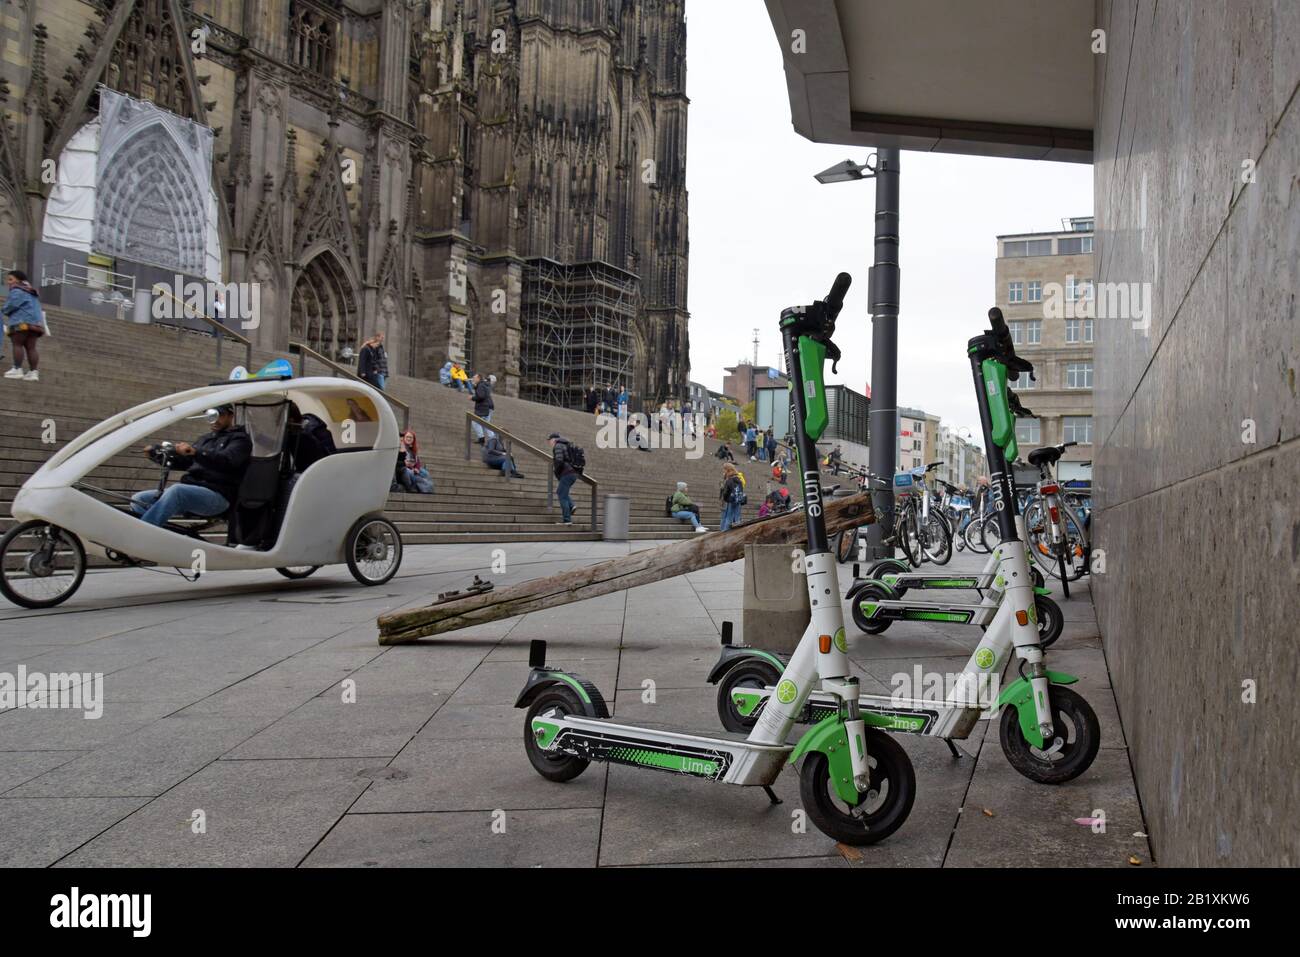 Lime S dockless electric scooters parked with hire bicycles outside Cologfne Cathedral, Germany Stock Photo